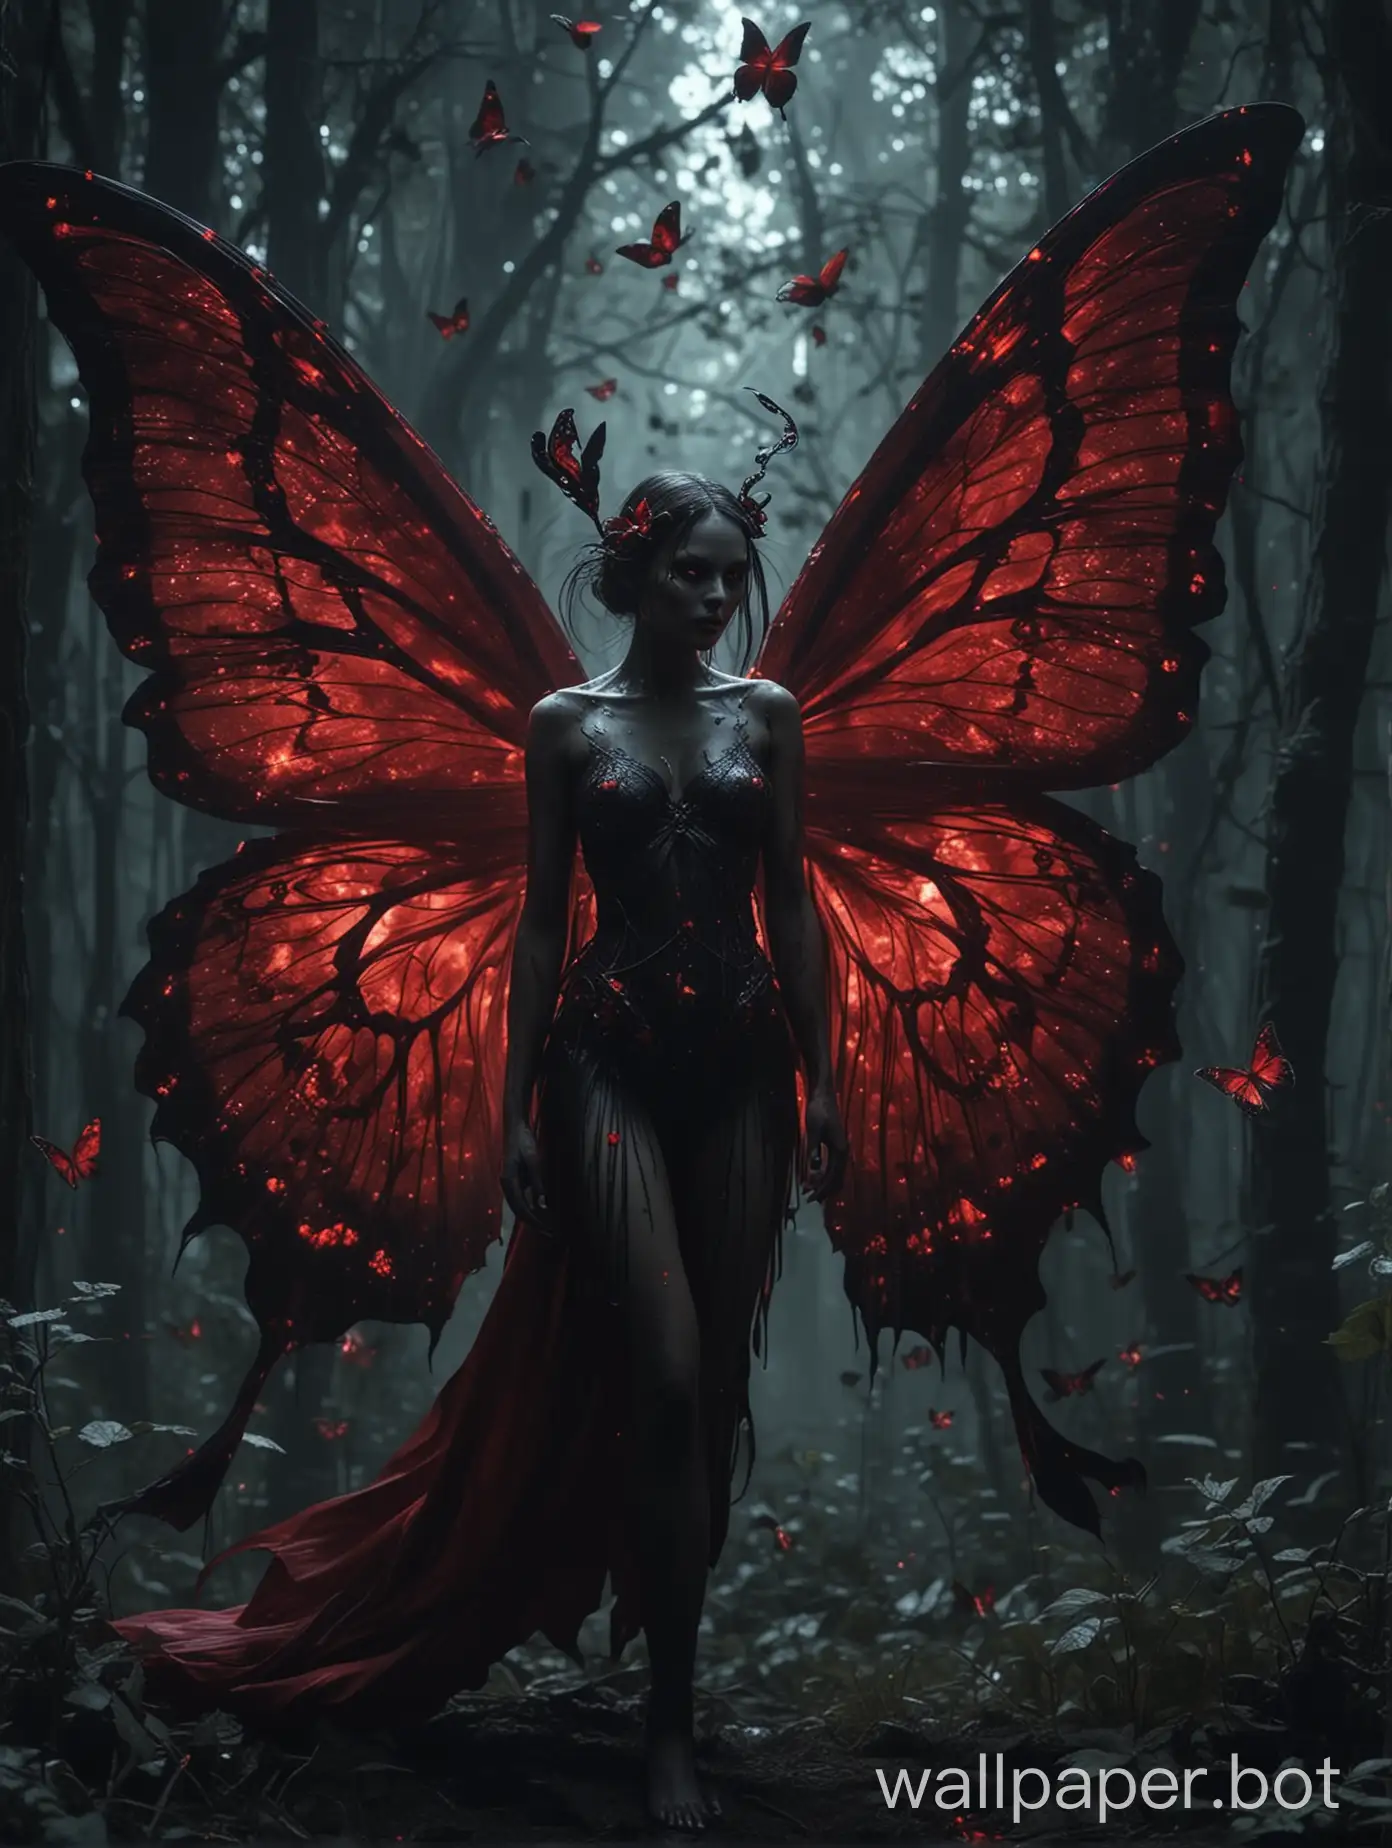 A surreal scene featuring a (((fantastical creature))) combining the elements of a butterfly and a fairy with the essence of a (((demonic figure))), colors of the natural world and the darkness of the supernatural red and black super pretty 4k.